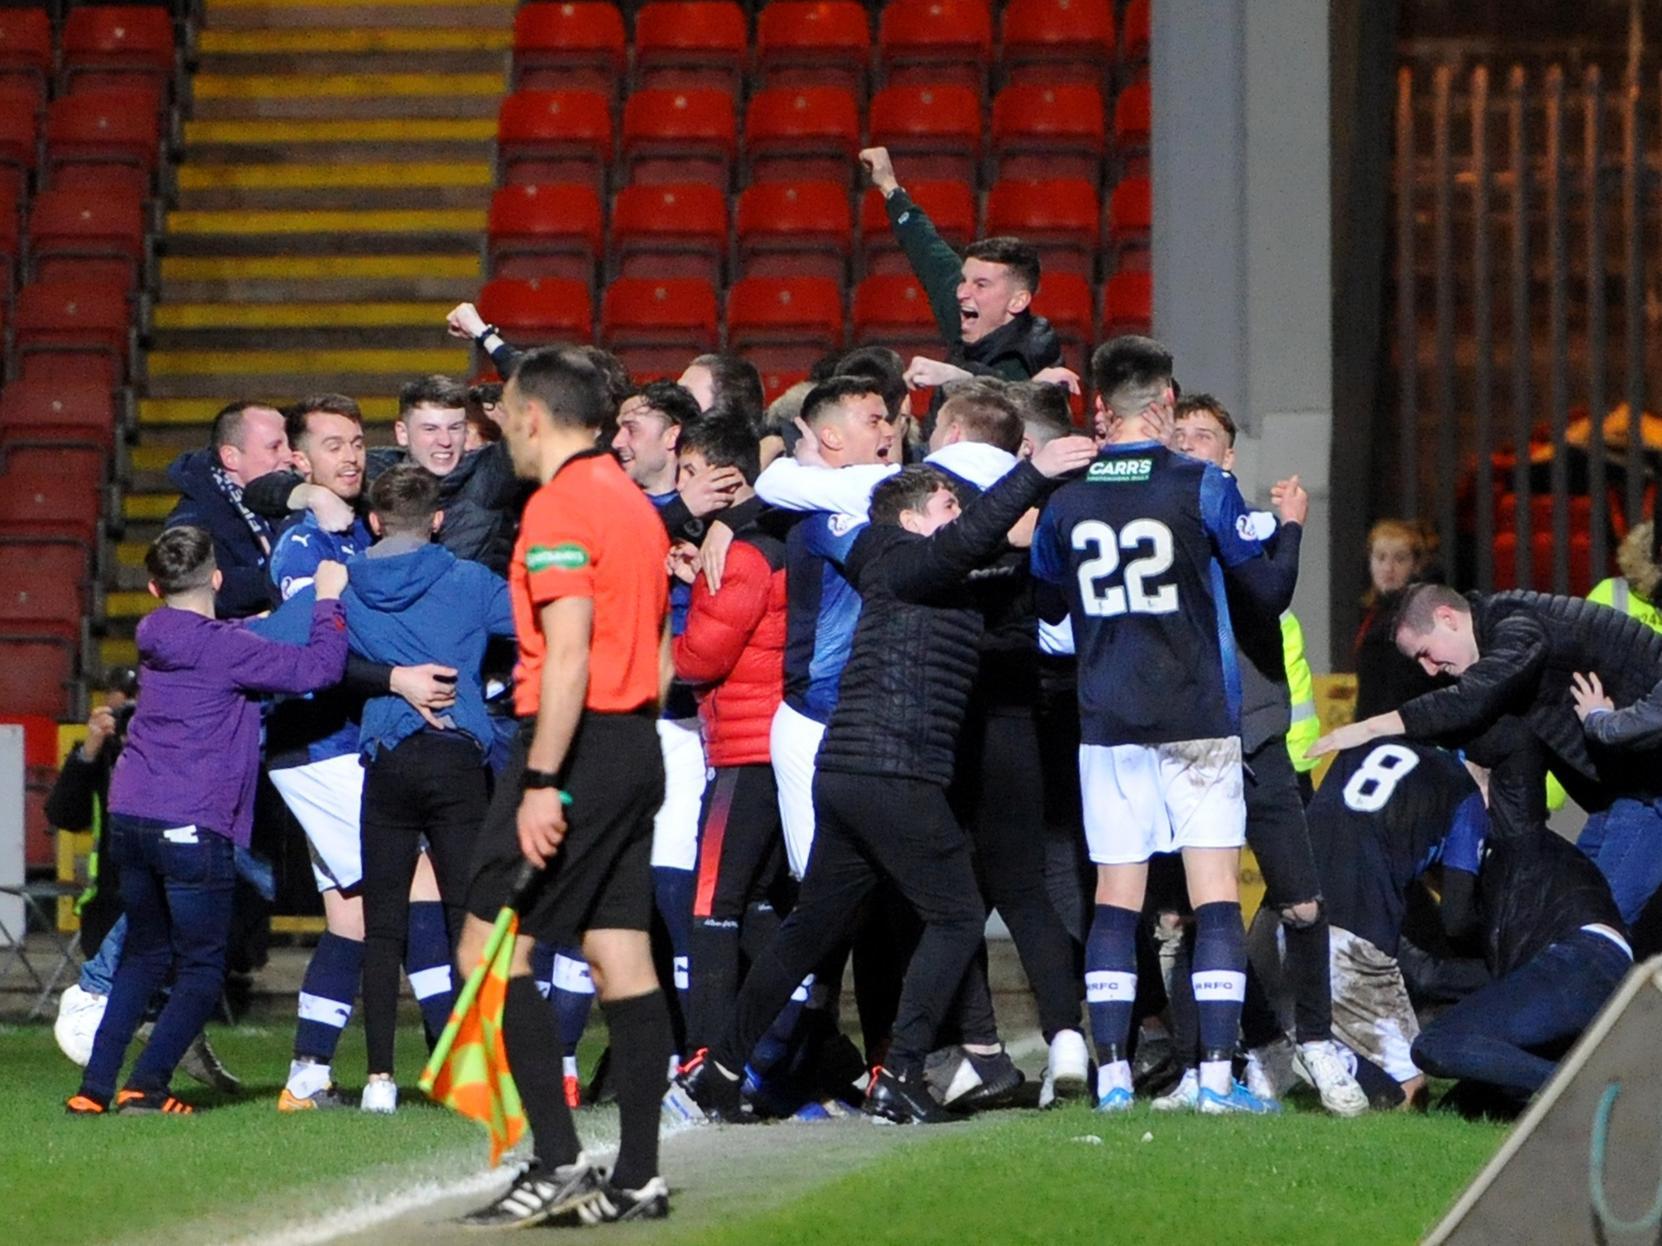 Raith Rovers supporters invade the pitch during the celebrations that followed Regan Hendry's clinching goal.